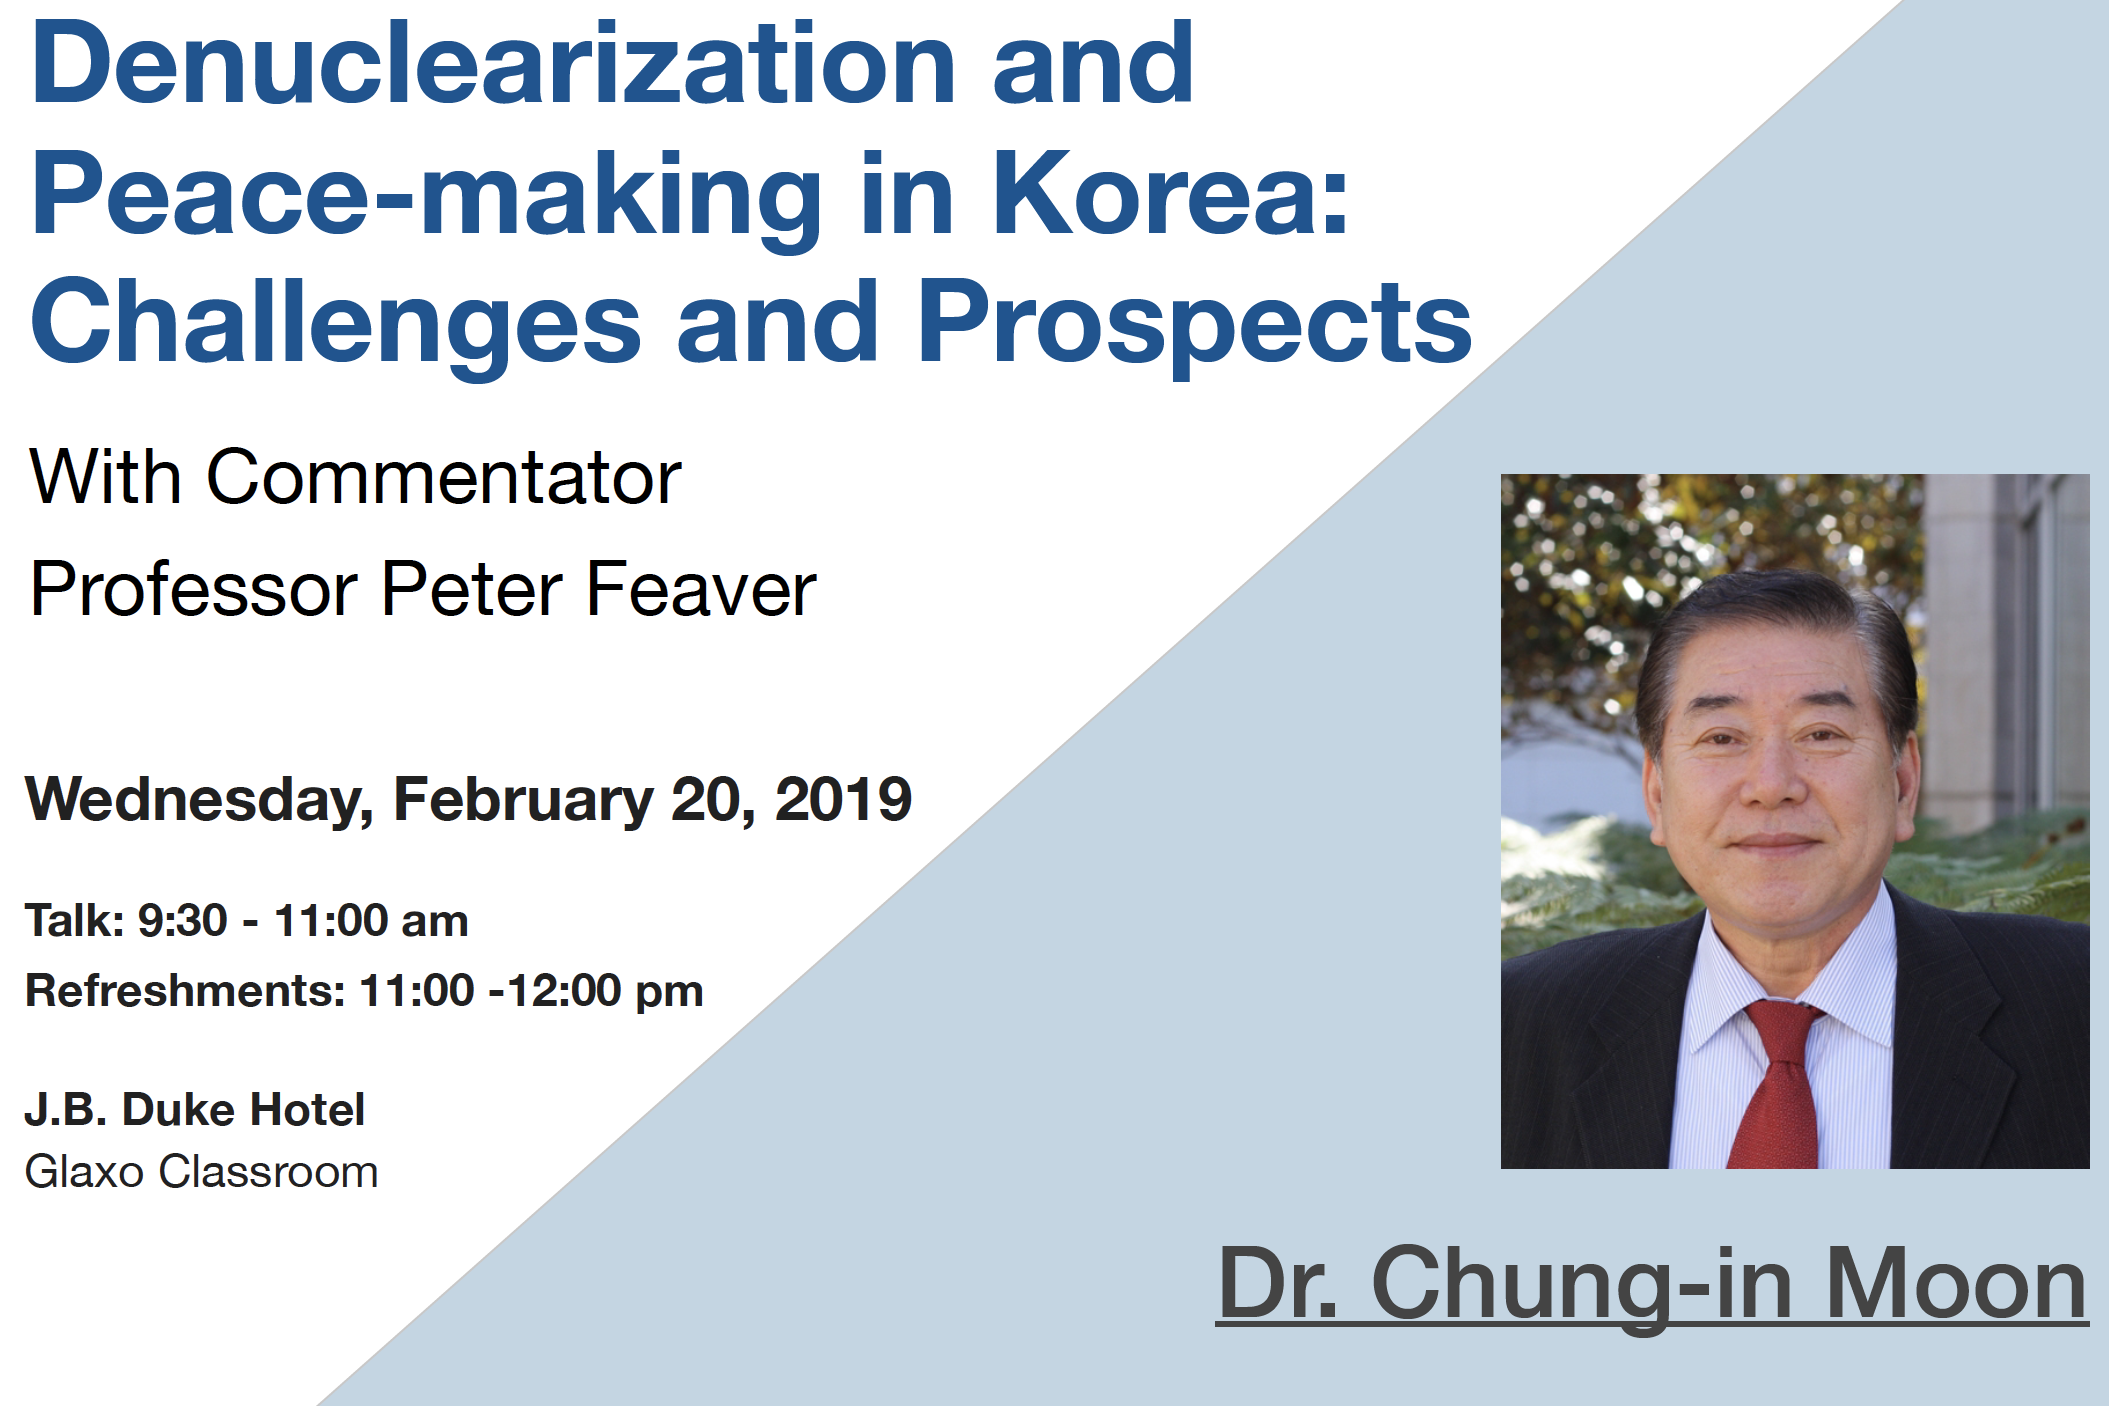 Denuclearization and Peace-making in Korea: Challenges and Prospects